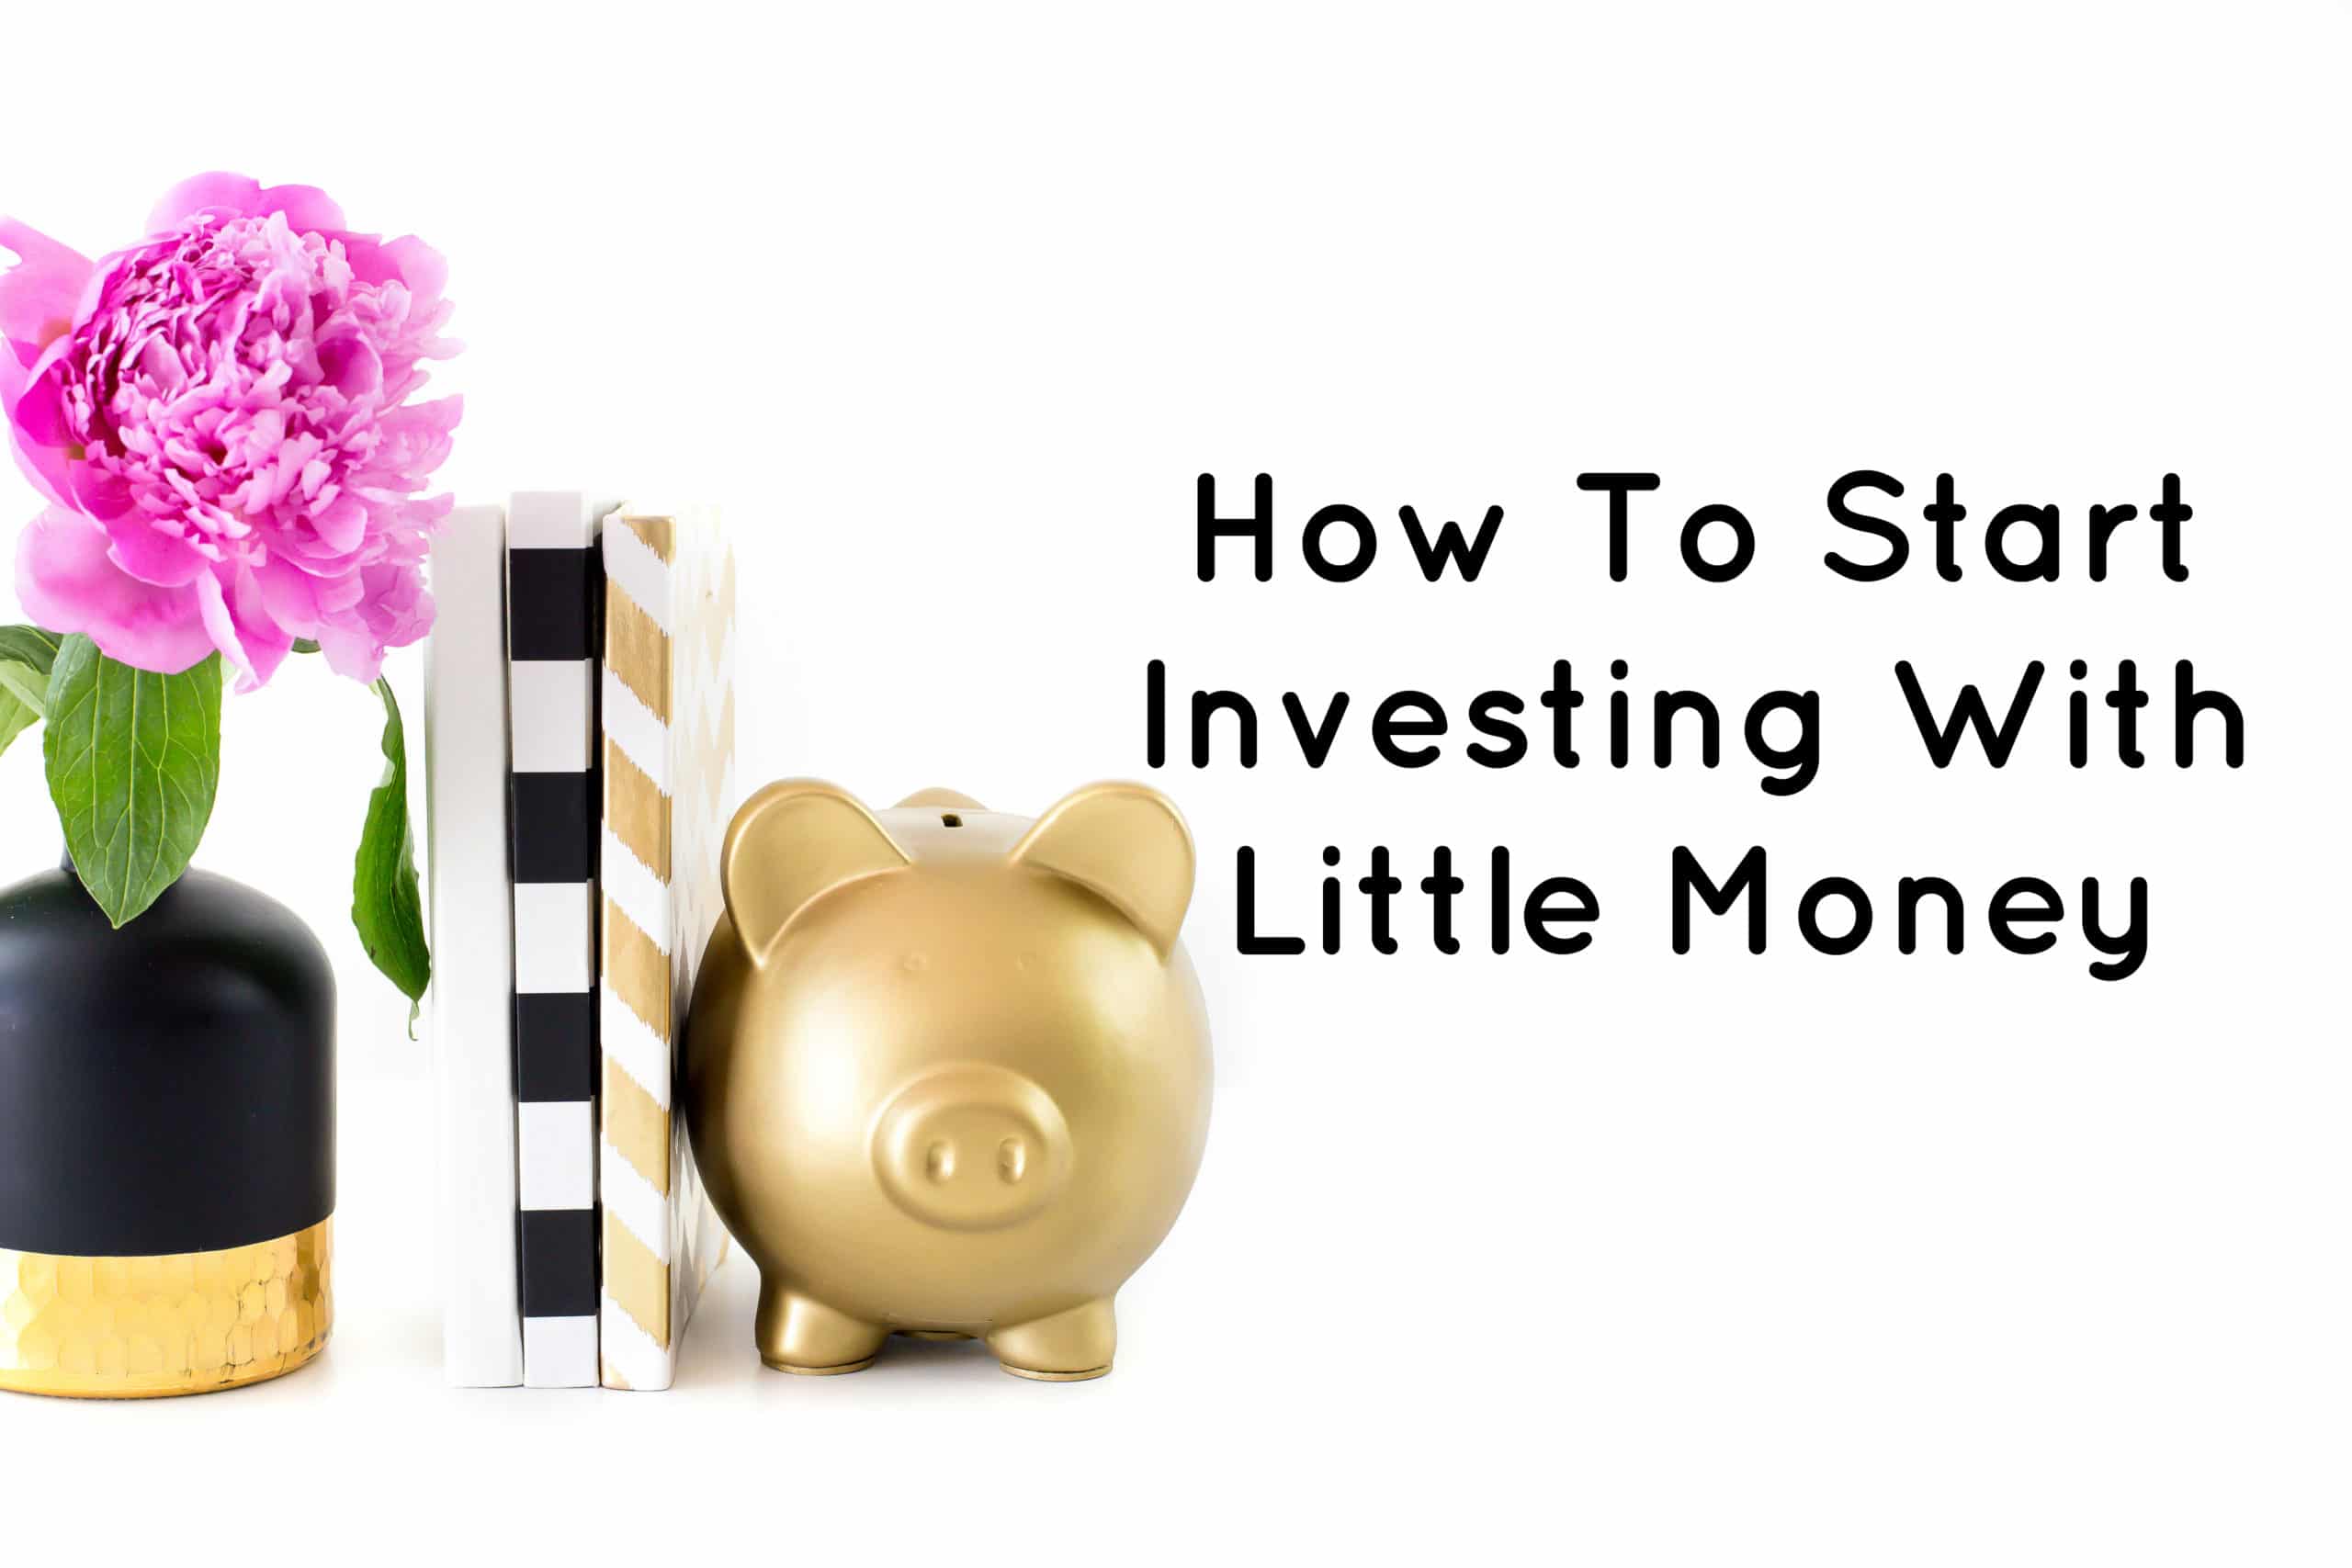 Ways to Start Investing With Little Money